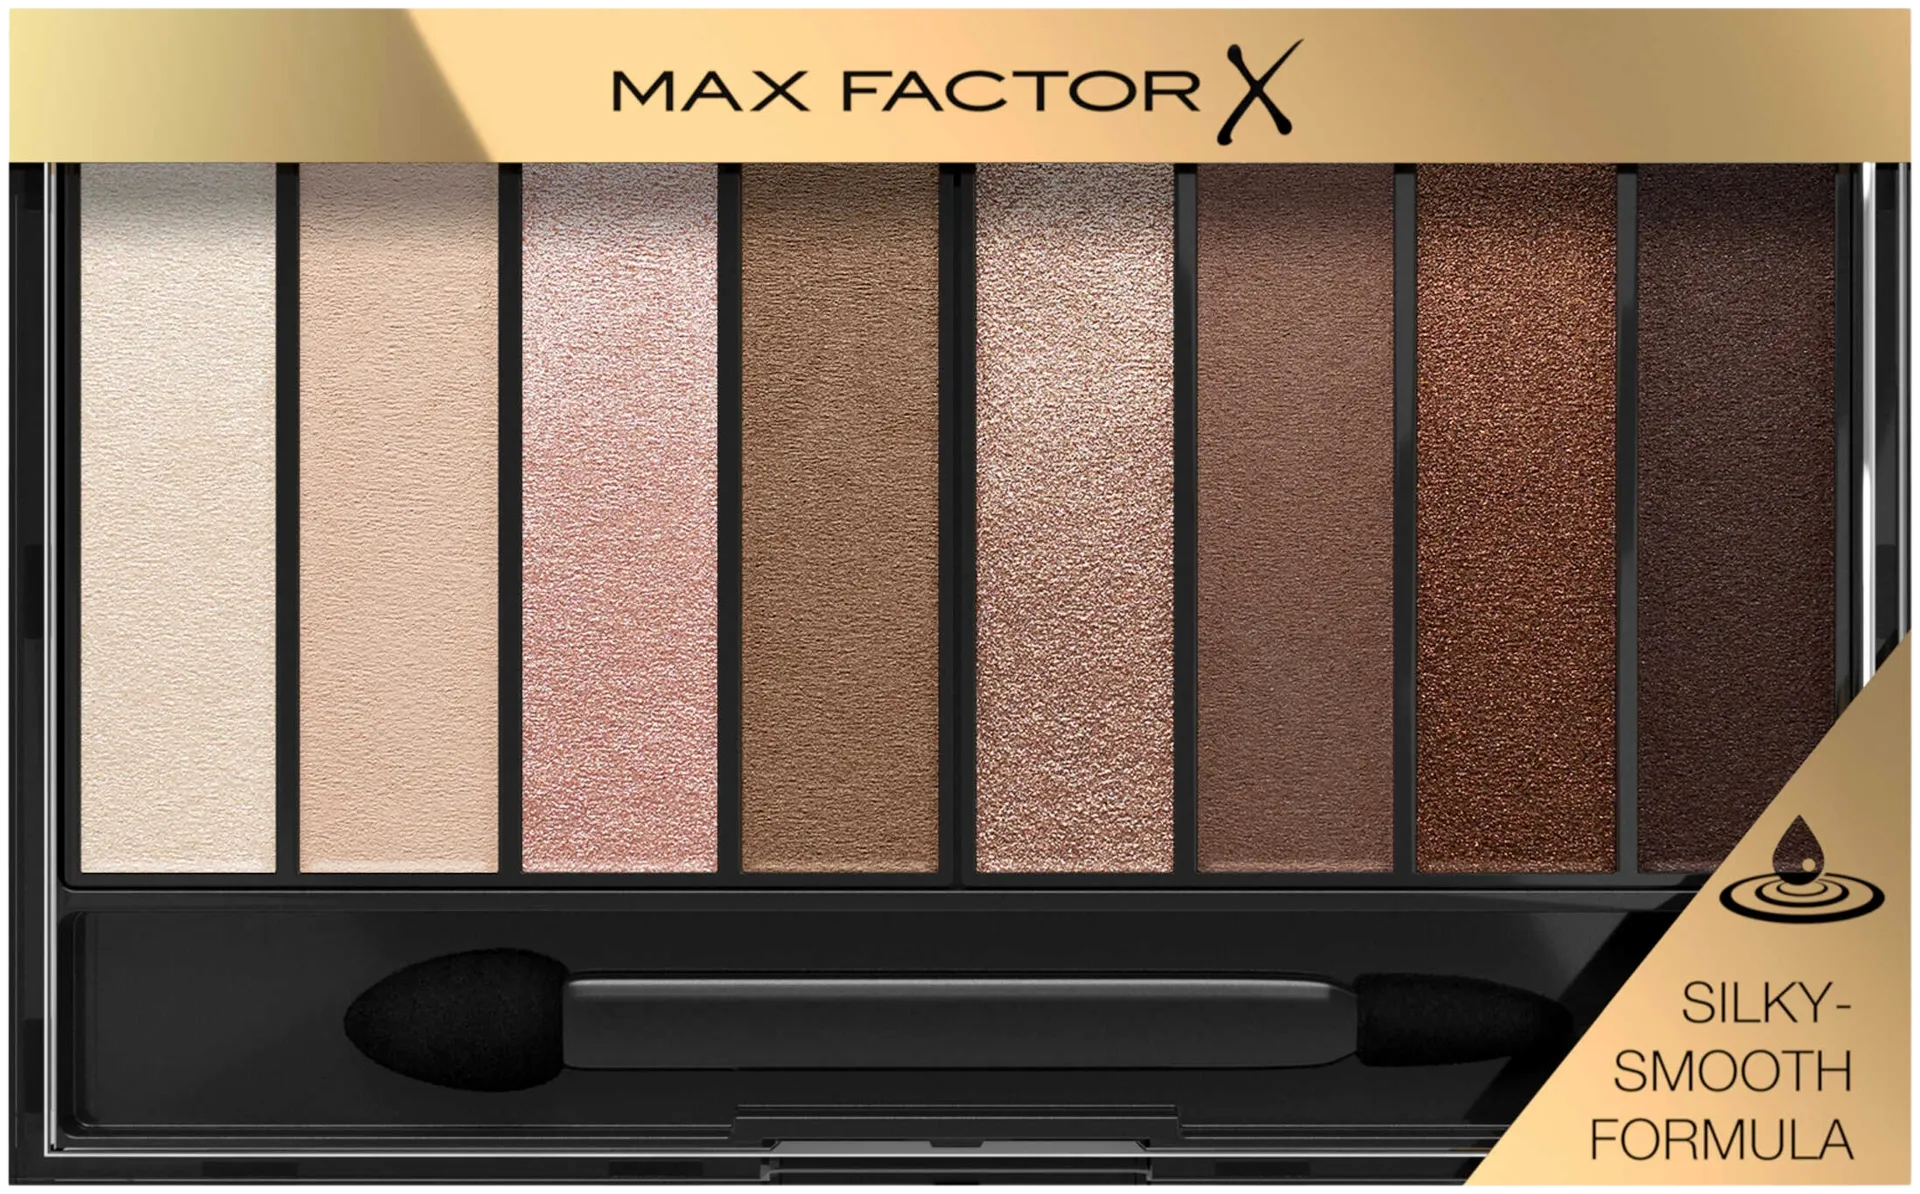 Max Factor Masterpiece Nude Palette 1 Cappuccino Nudes 6,5 g - 1